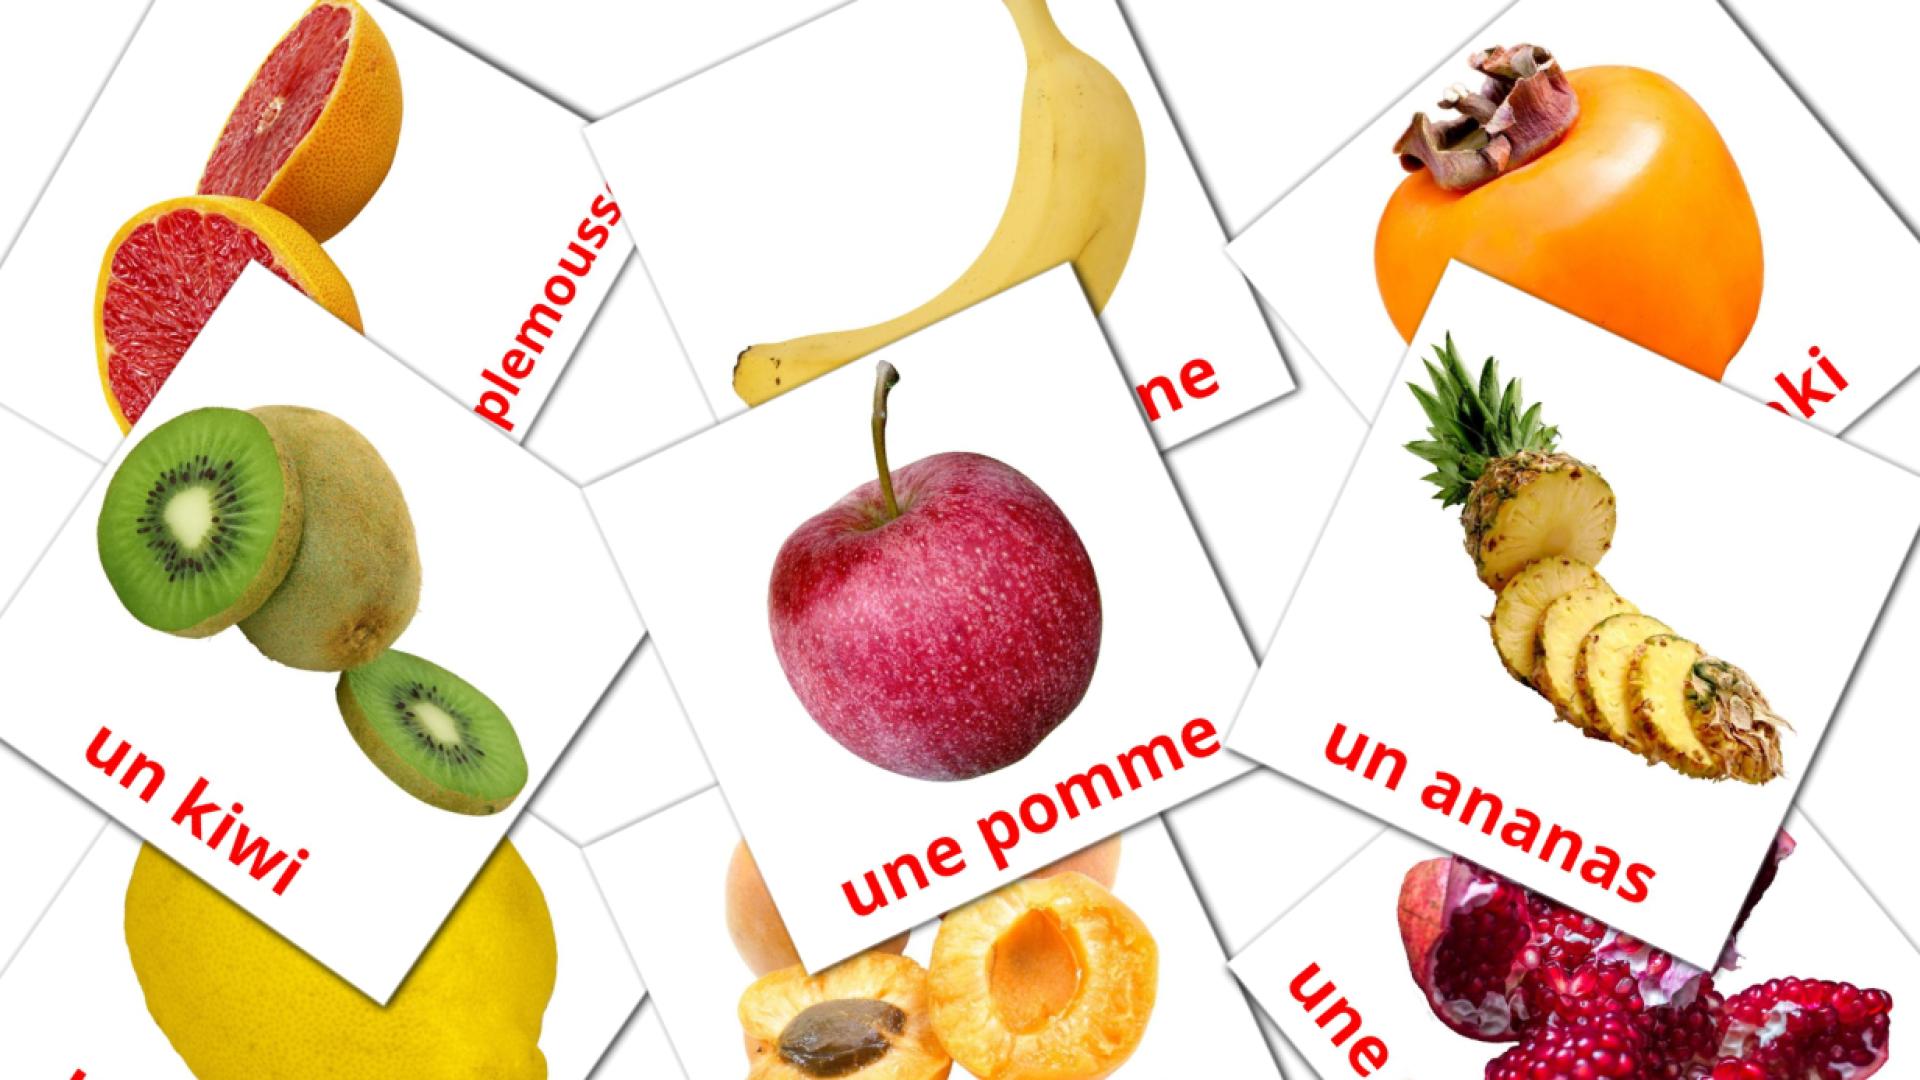 20 Les Fruits flashcards